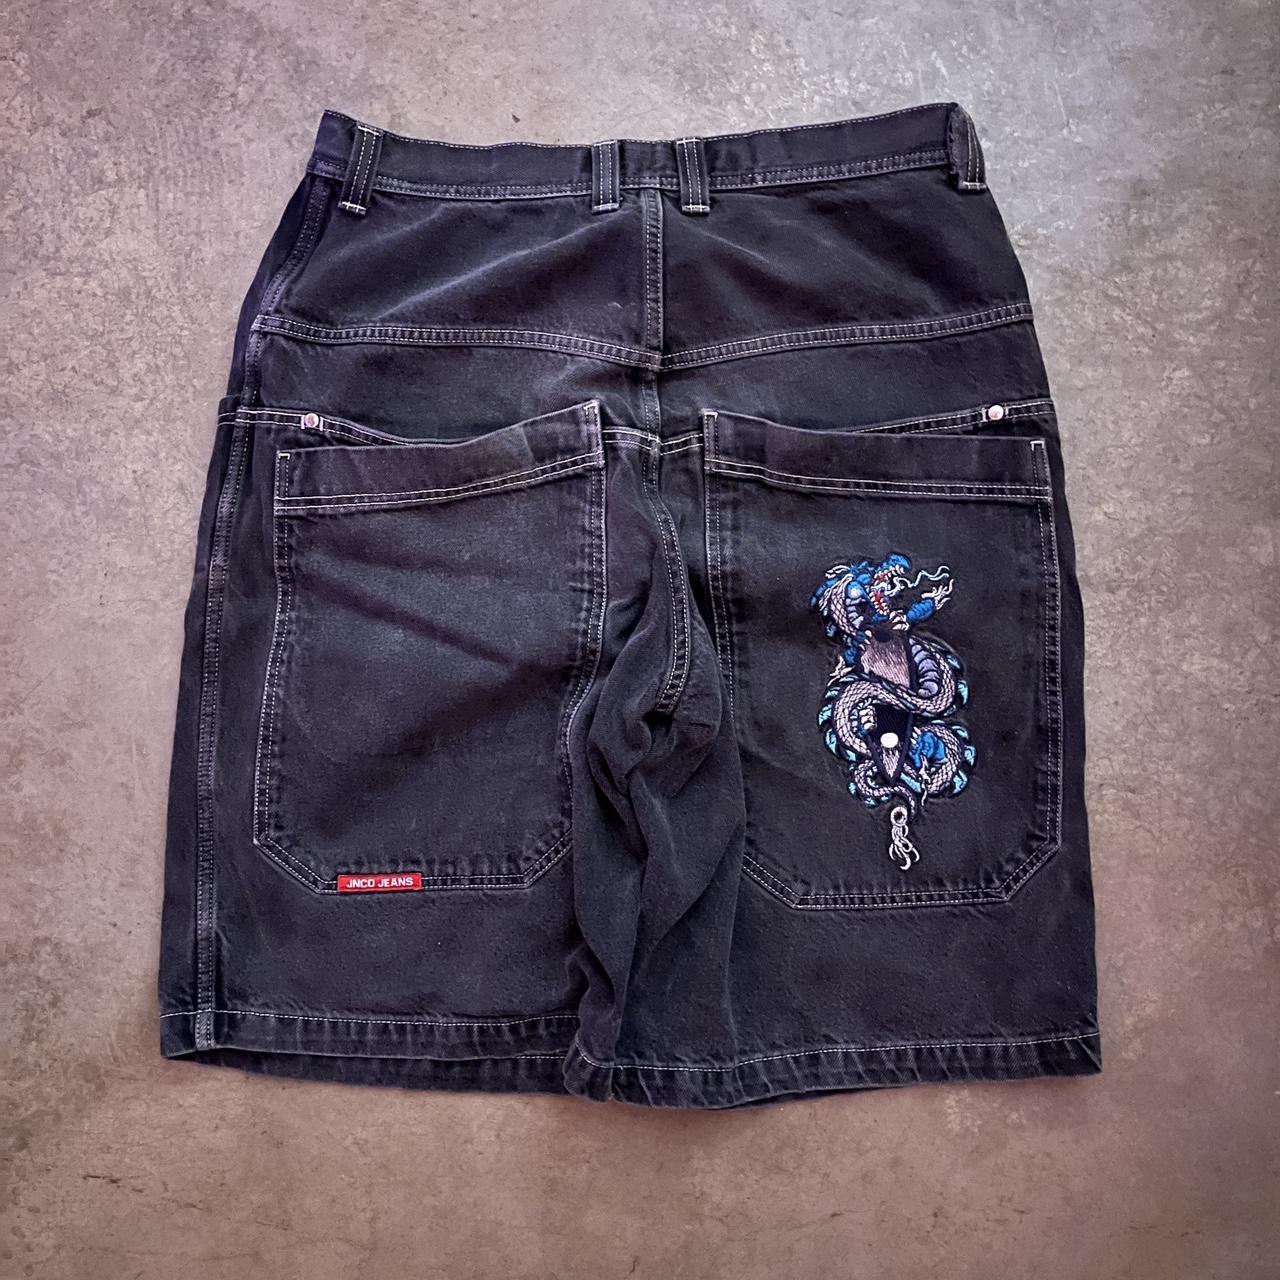 Super rare JNCO Jorts with crazy embroidery, double... - Depop